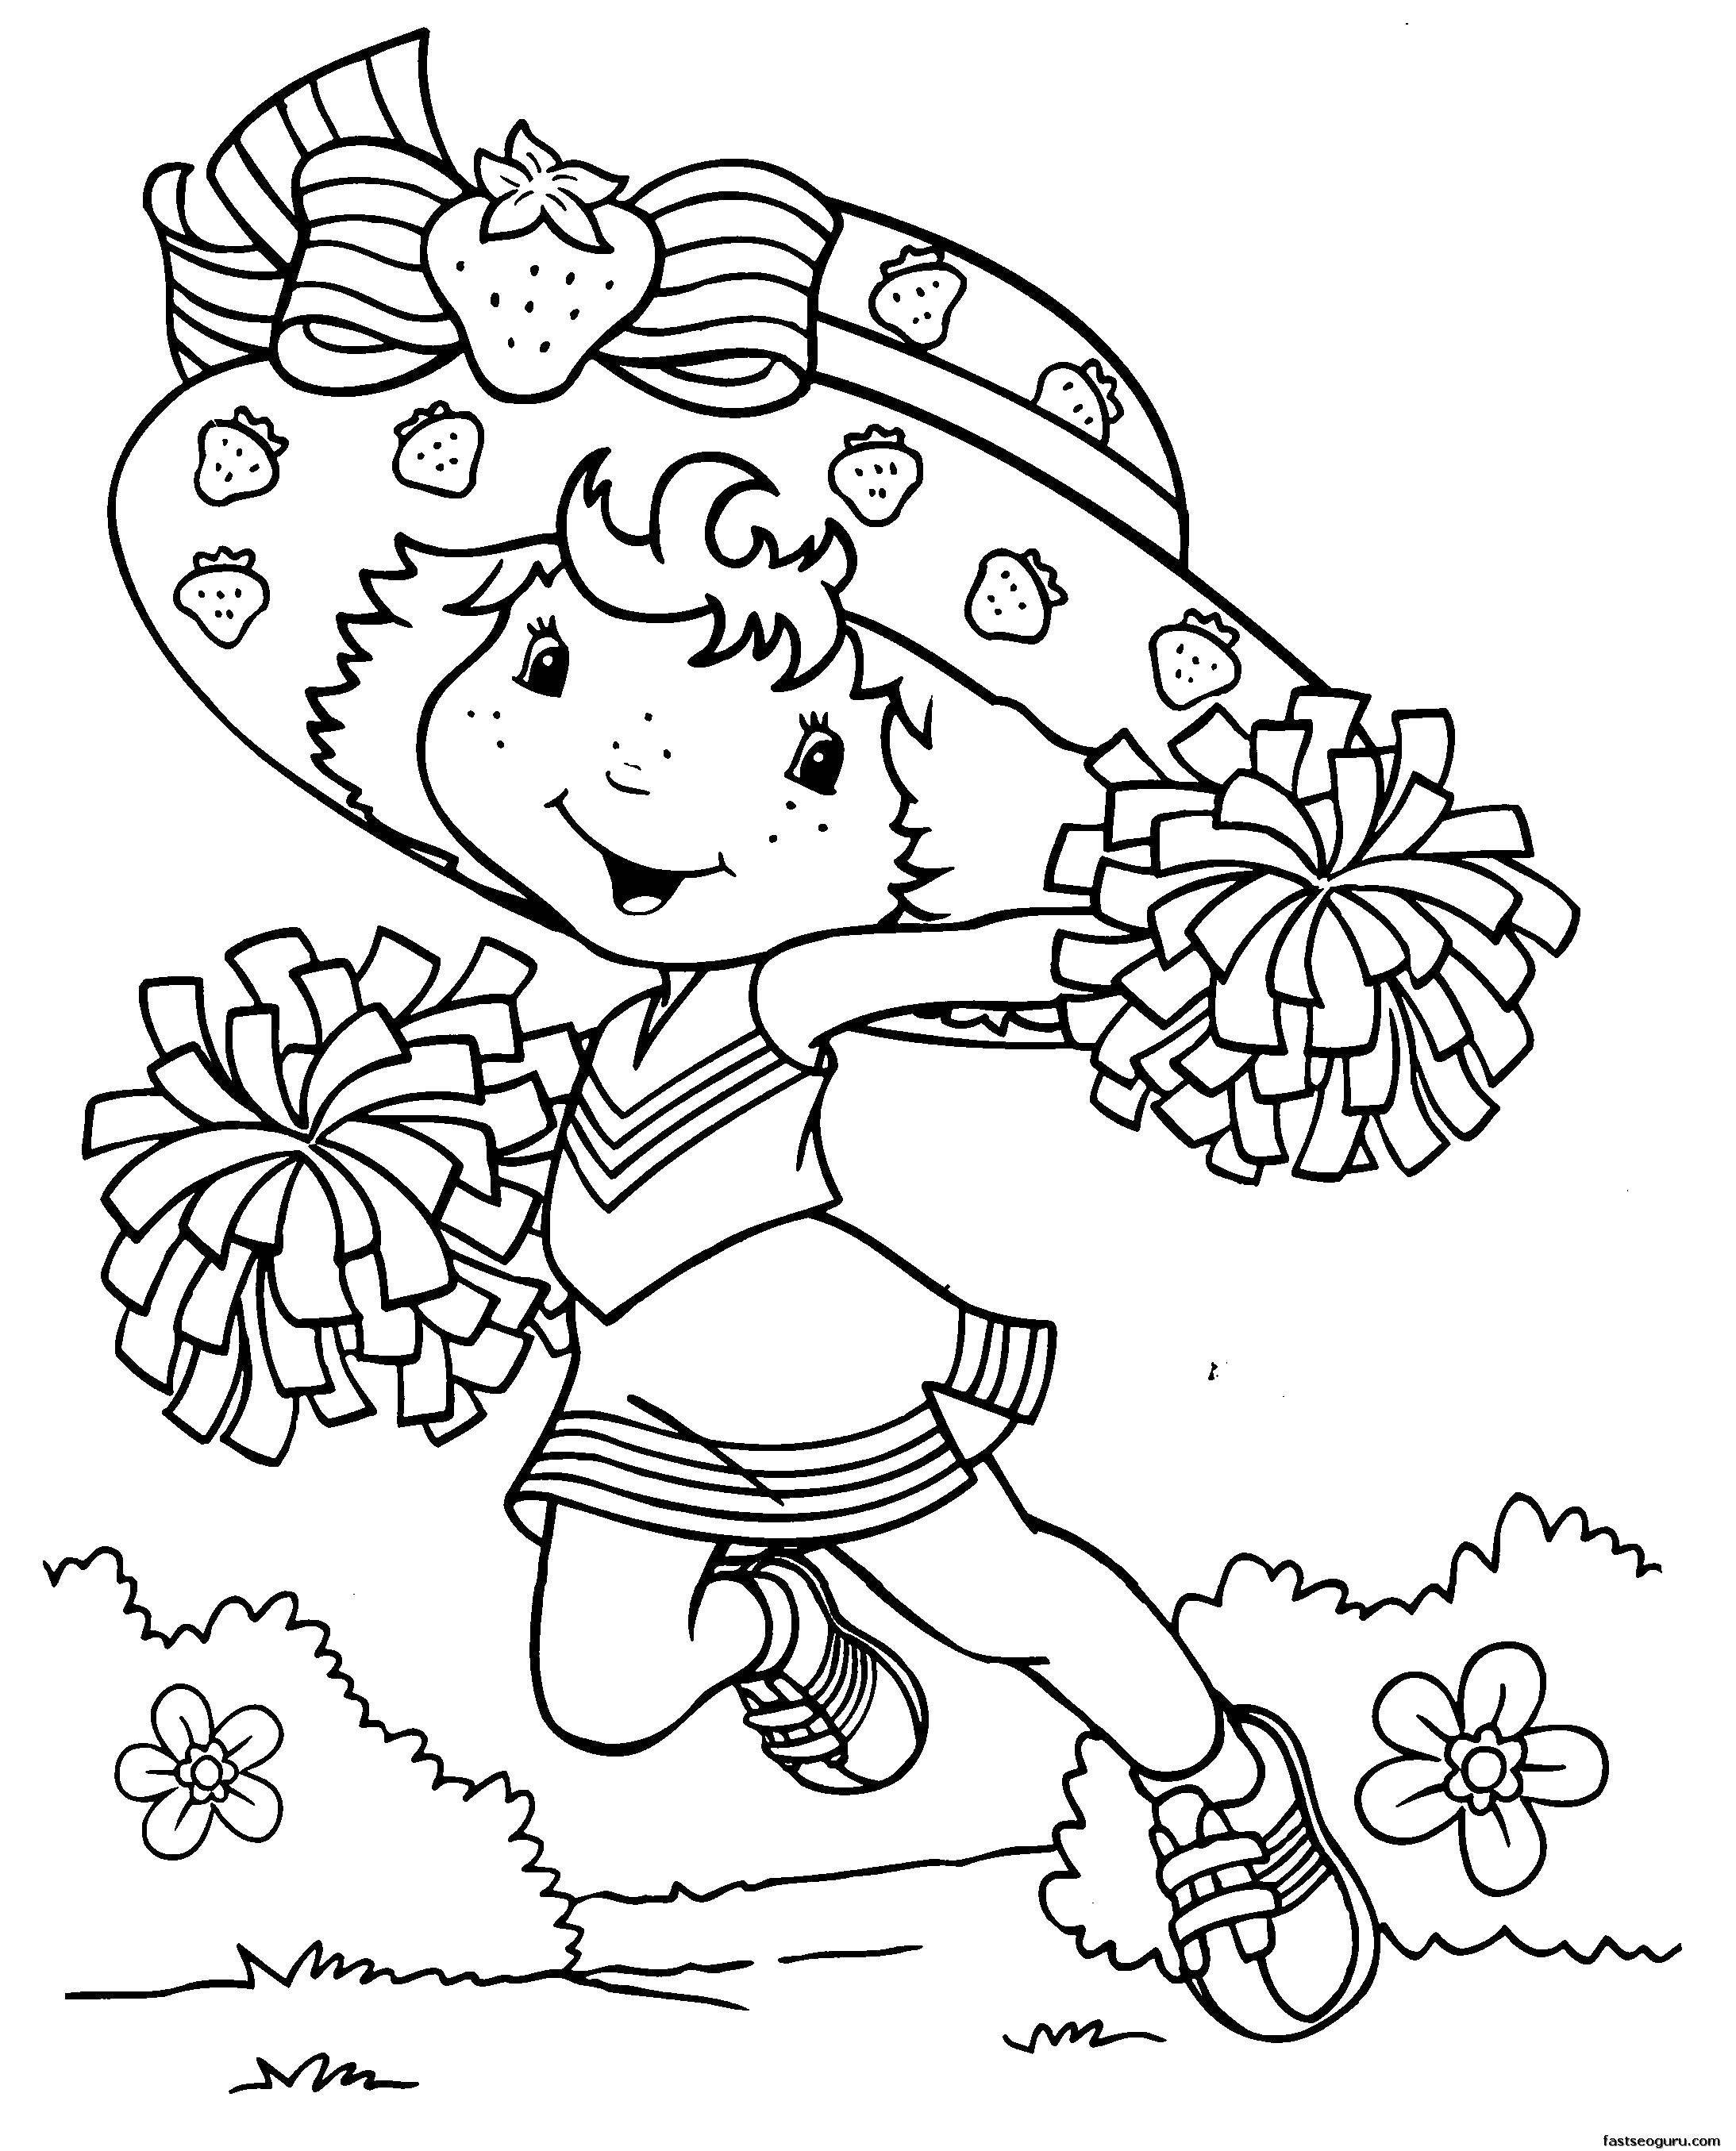 Coloring Girl strawberry. Category cartoons. Tags:  Cartoon character.